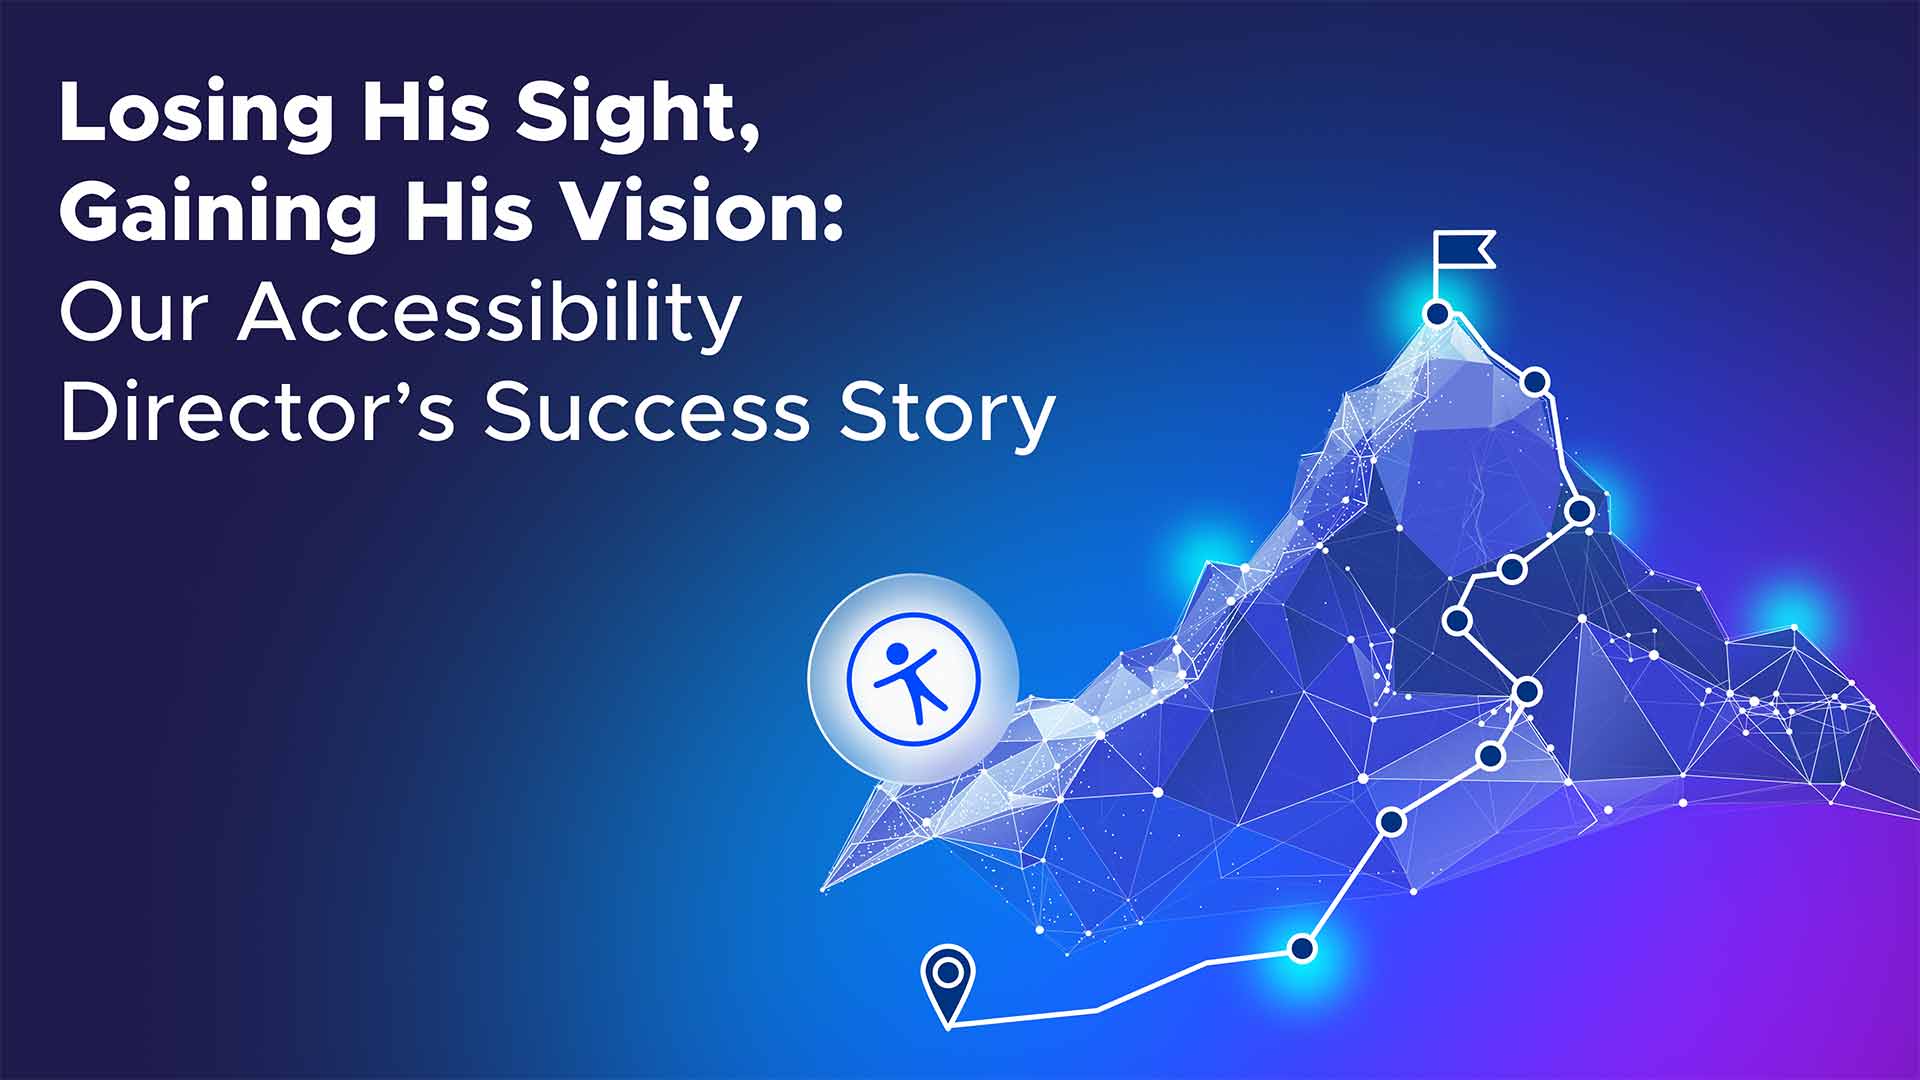 Losing His Sight, Gaining His Vision: Our Accessibility Director’s Success Story